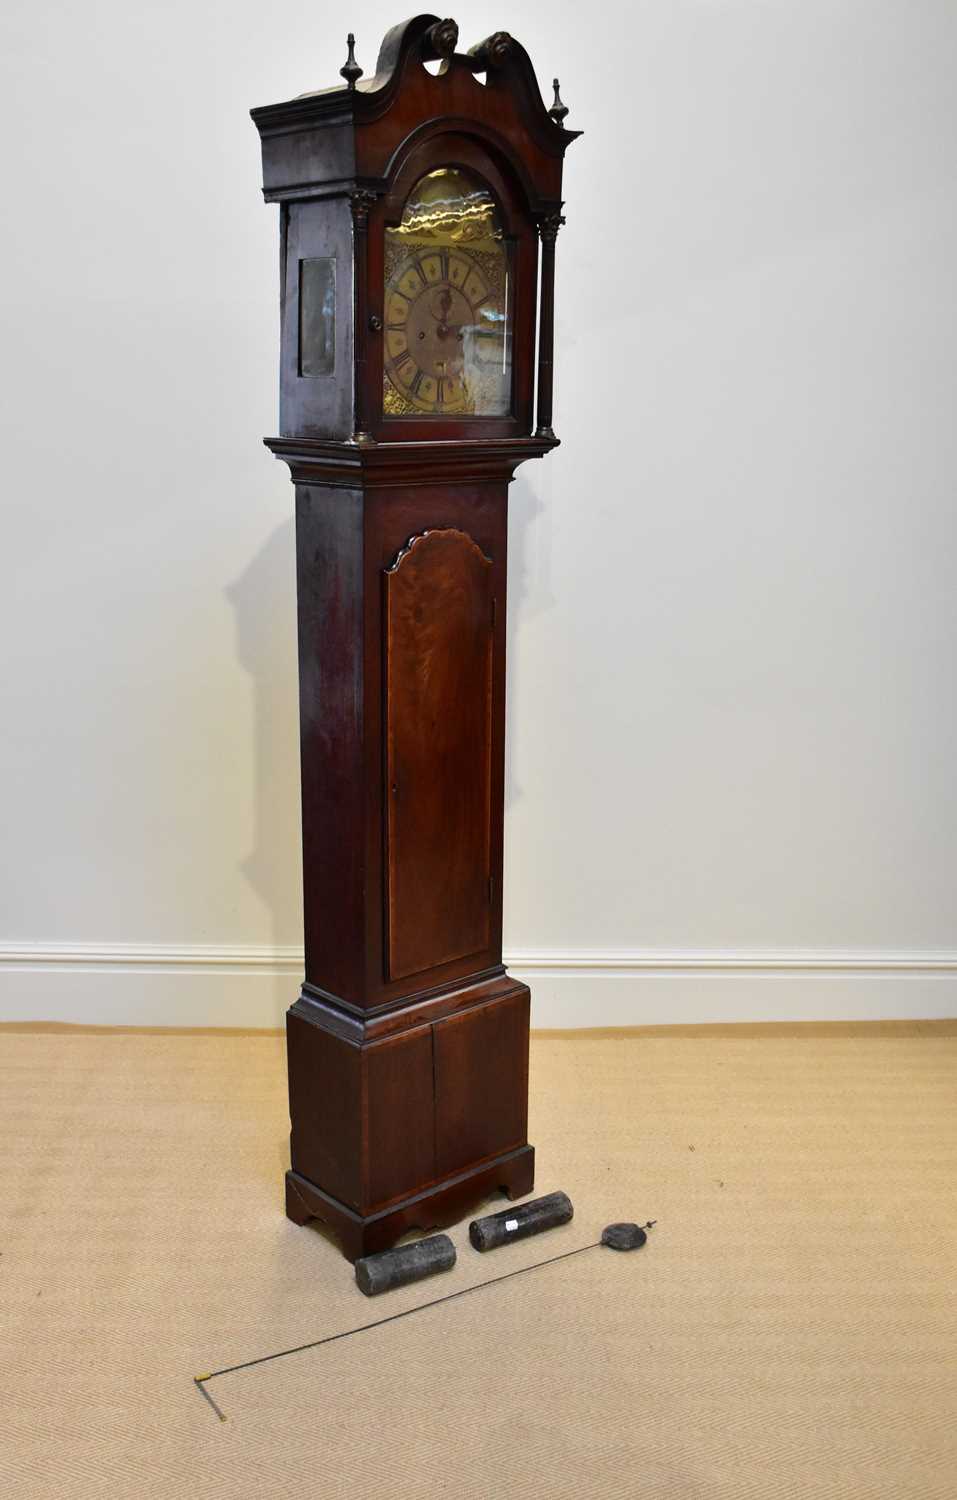 WILLIAM PEIRCE, LONDON; a late18th/early 19th century eight day longcase clock, the brass face set